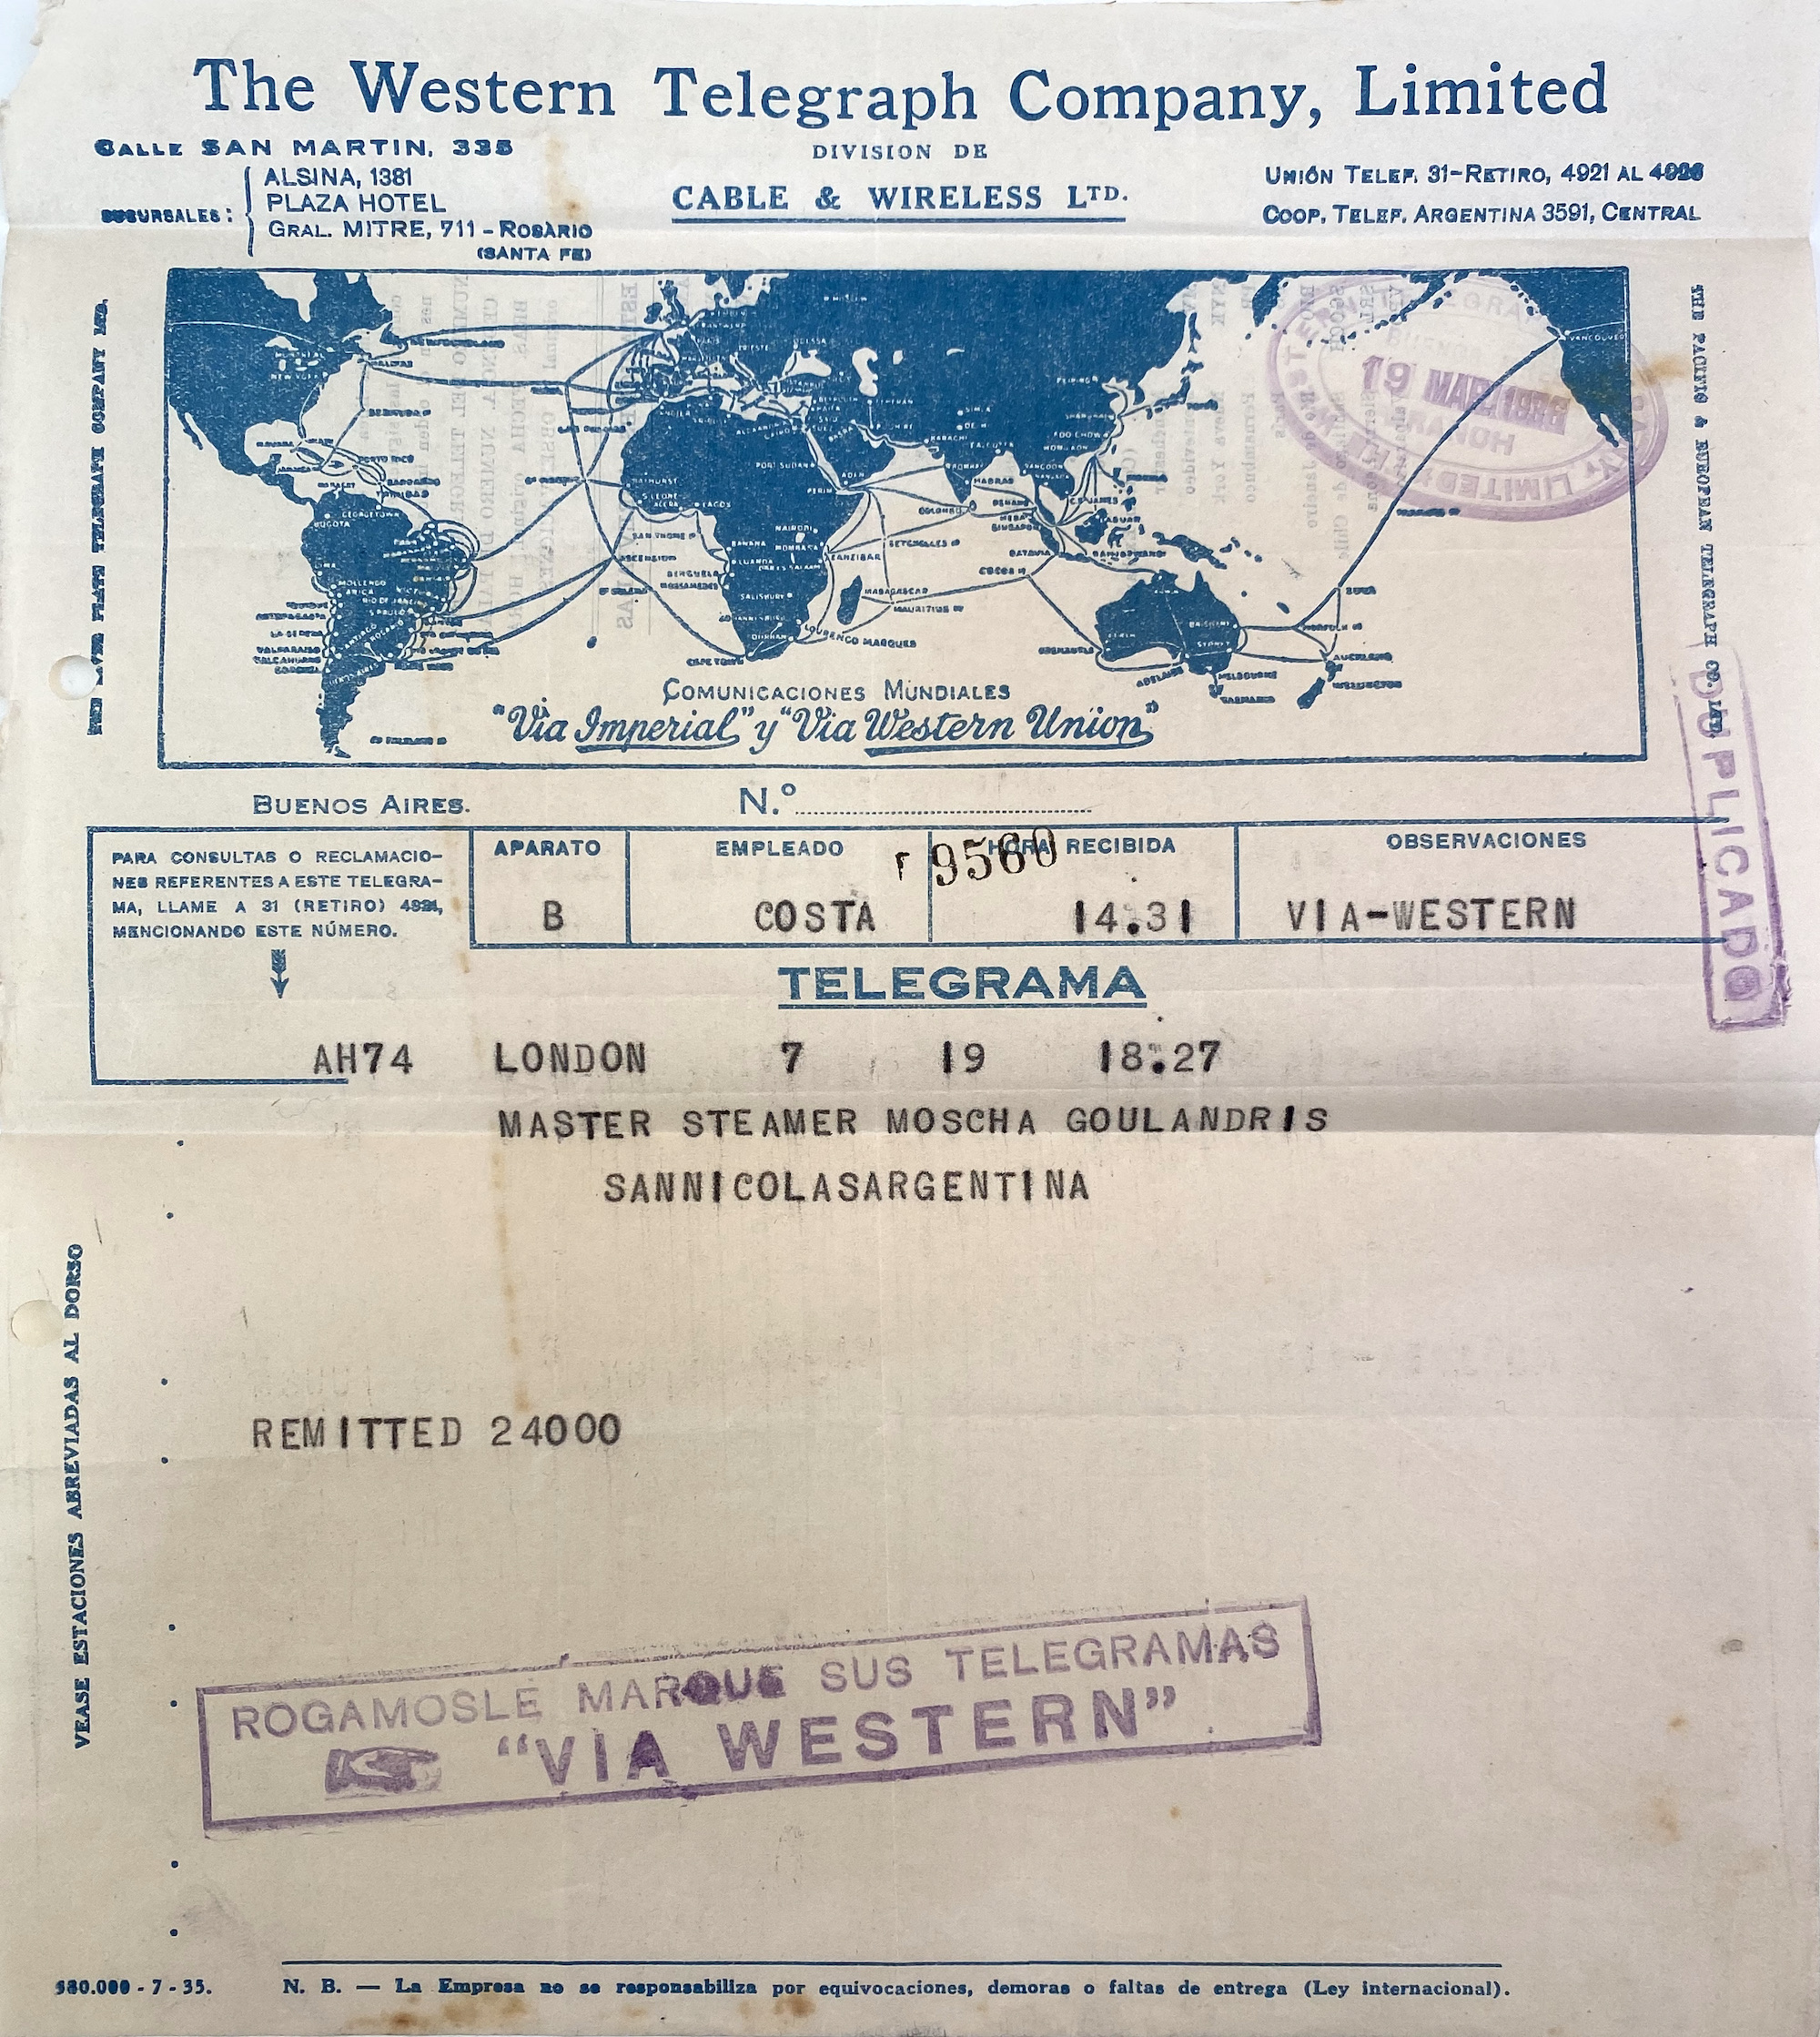 Western Telegram form to Master of the S.S. Moscha Goulandris in Buenos Aires